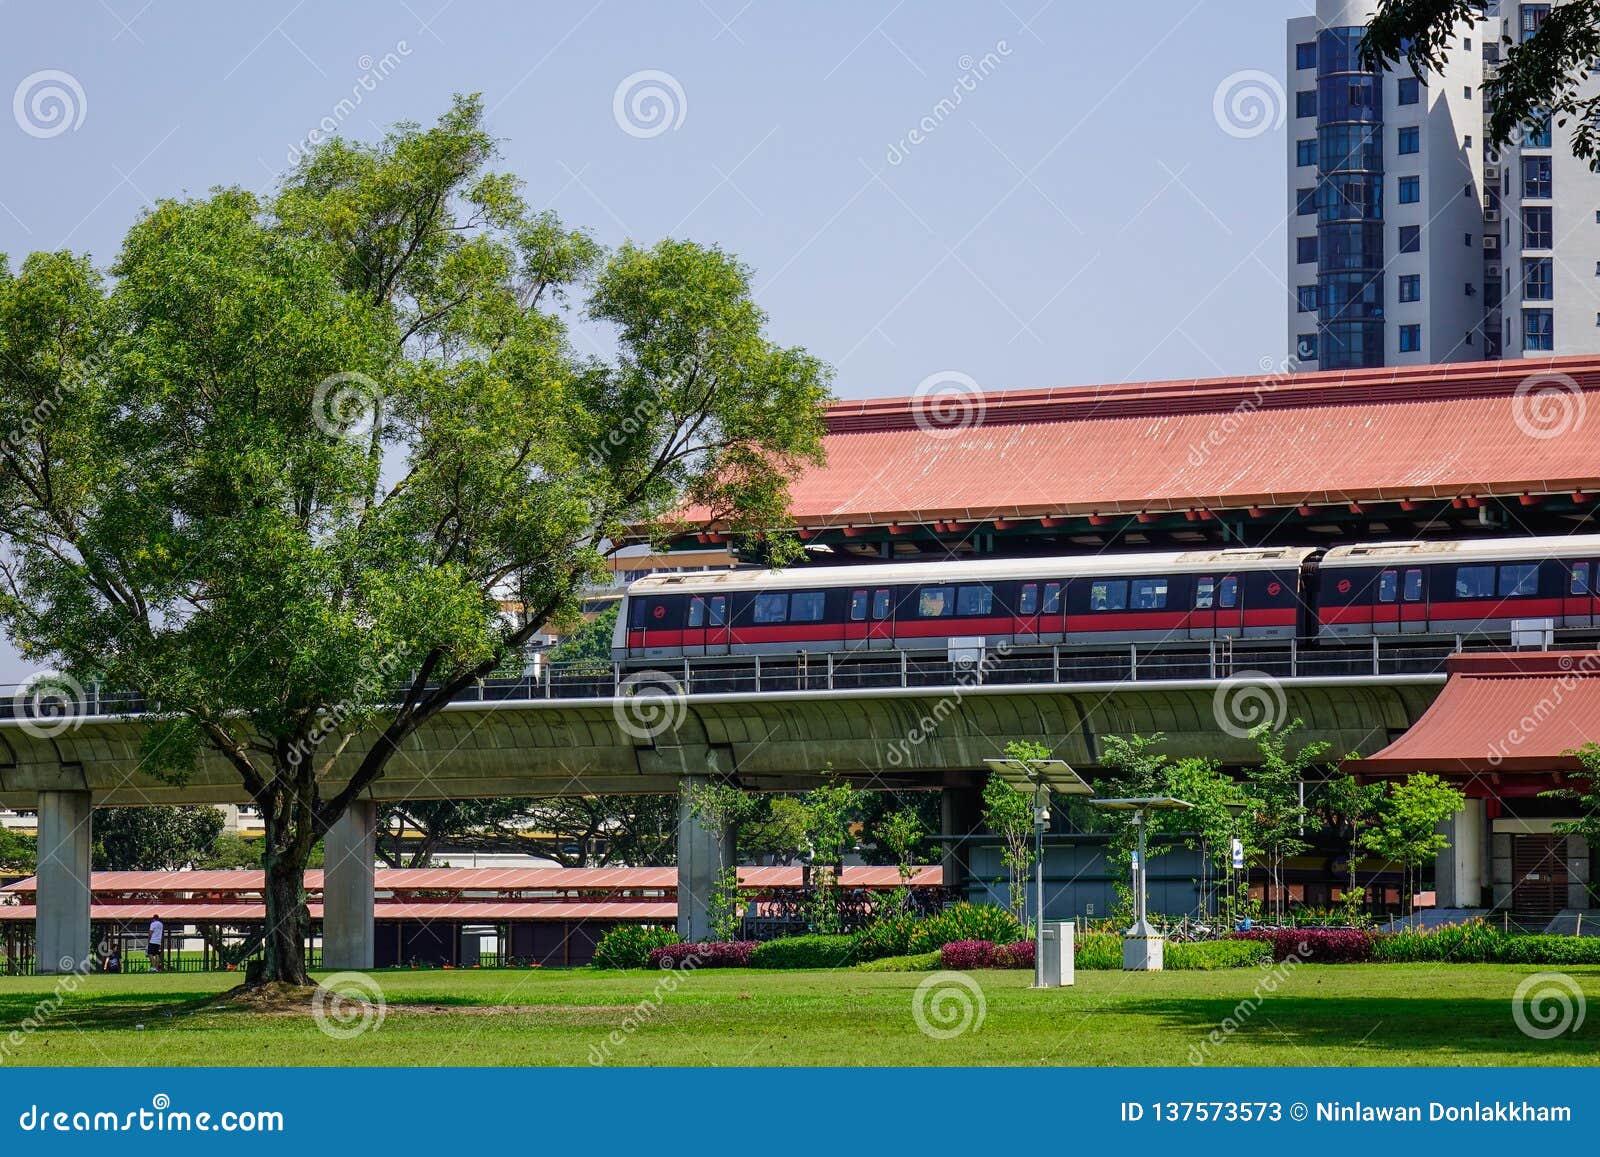 Chinese Garden Mrt Station In Singapore Editorial Stock Photo Image Of Networking Rapid 137573573